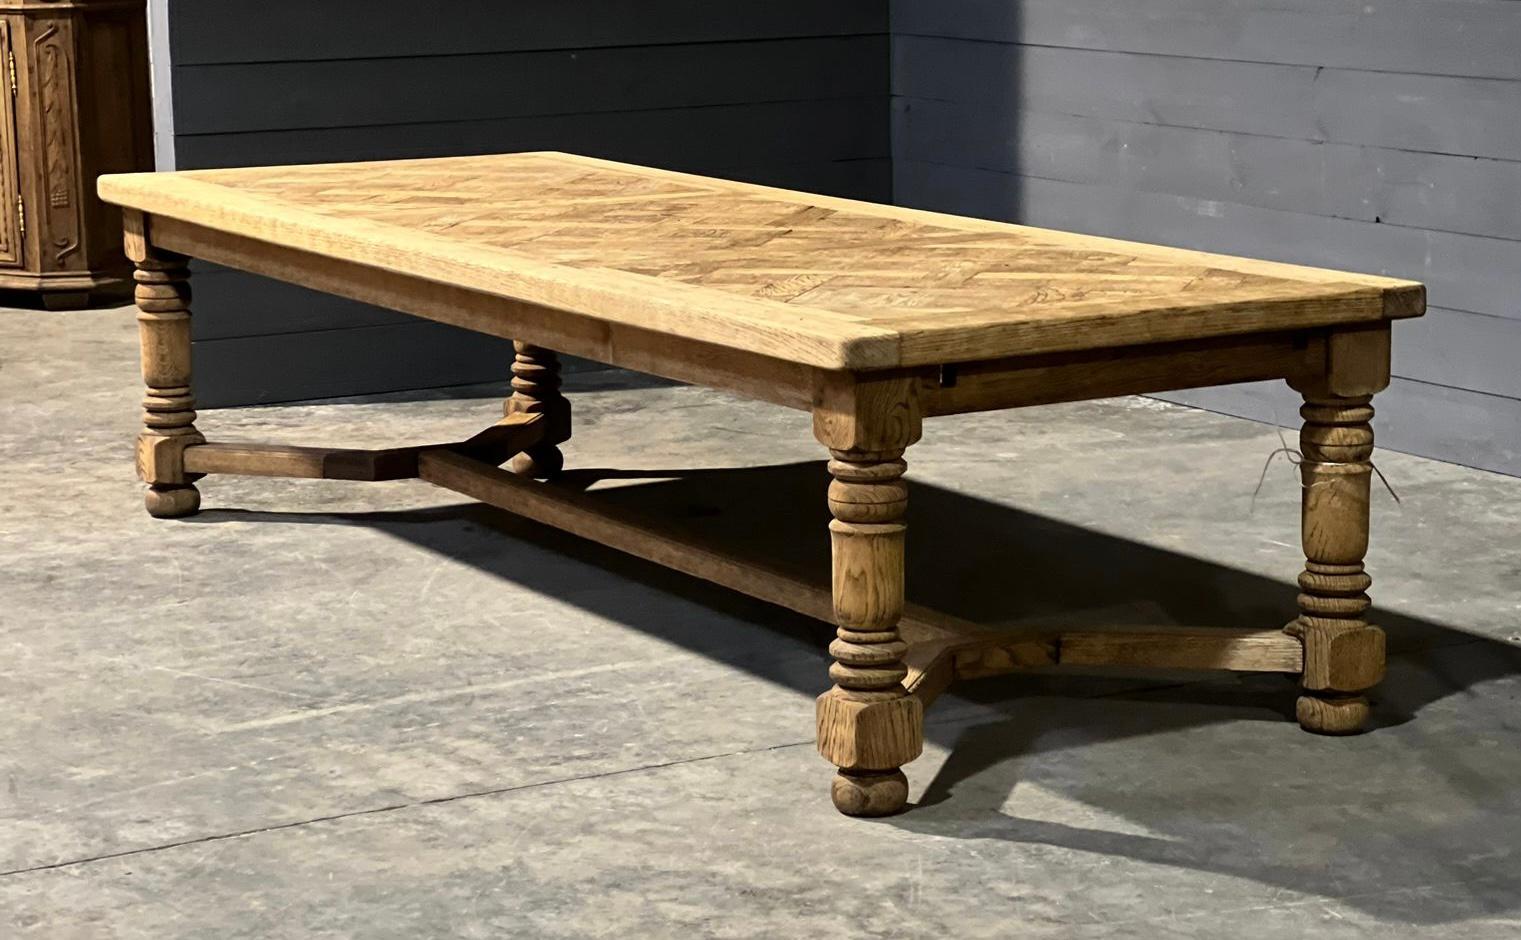 We are very pleased to offer an one off incredible over 3M Solid Oak Dining Table and very rarely deep at 112 cm, originating from France and made from solid oak, having a parquetry oak top and dating to the early 1900s. Of excellent quality